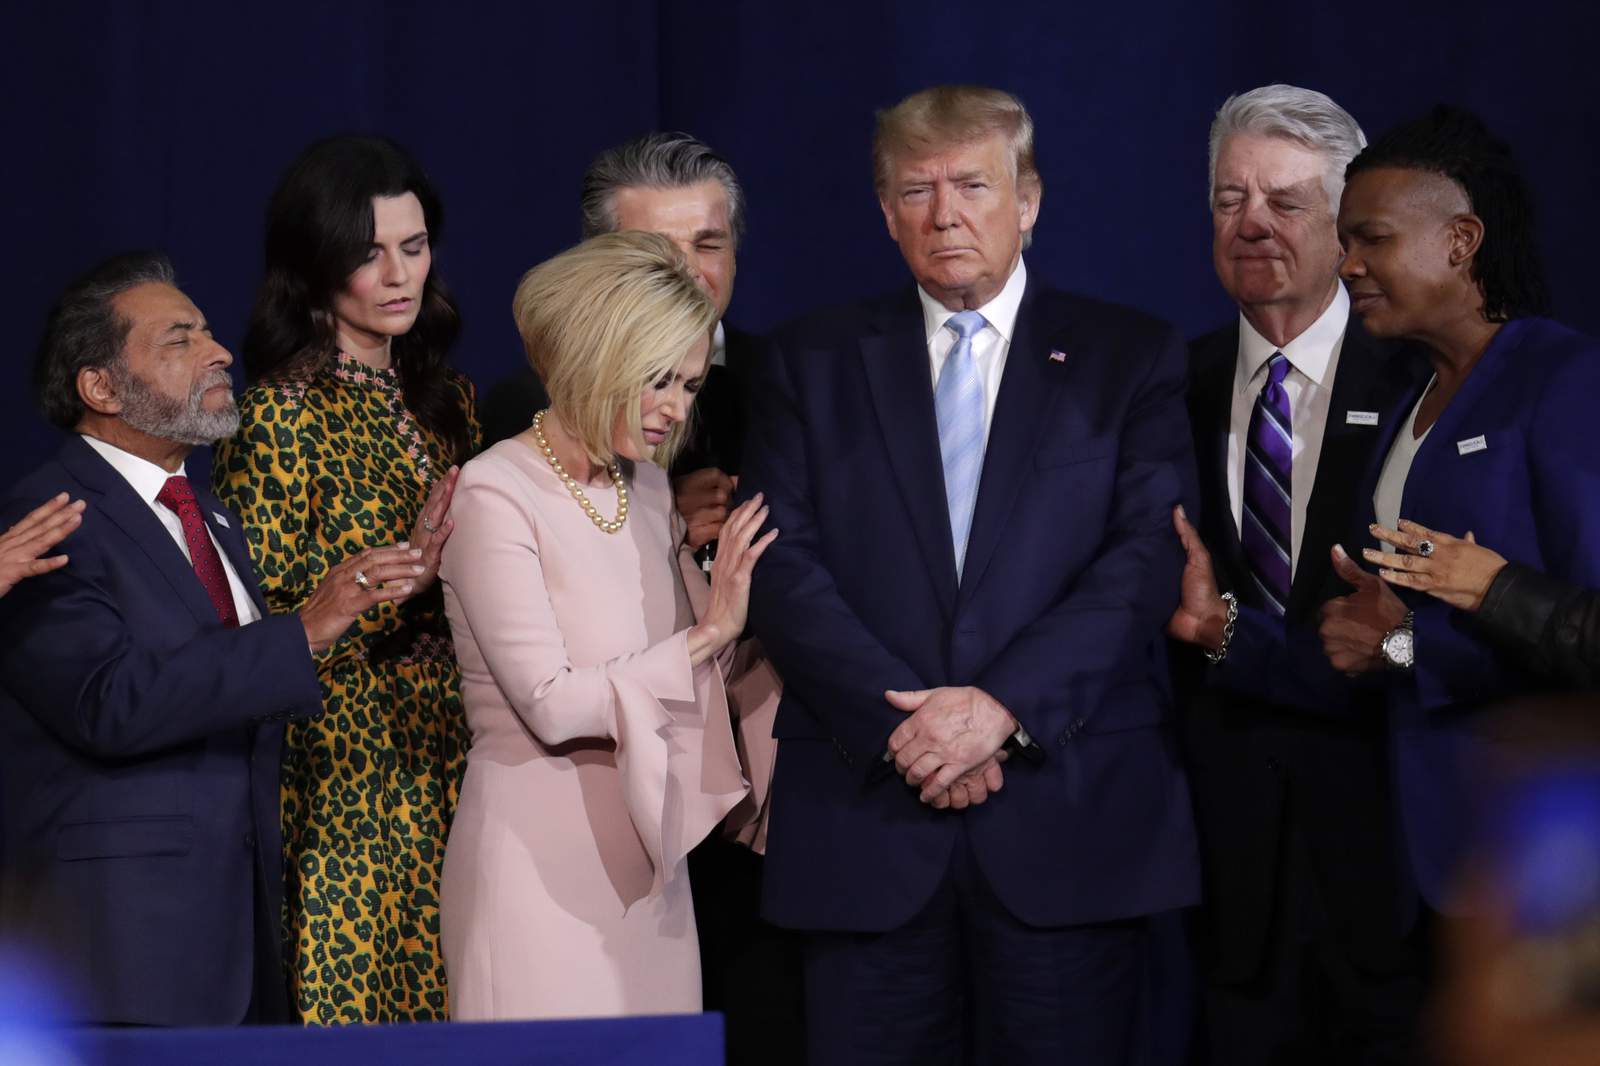 Trump's faithful: 2020 tests his ties to white evangelicals